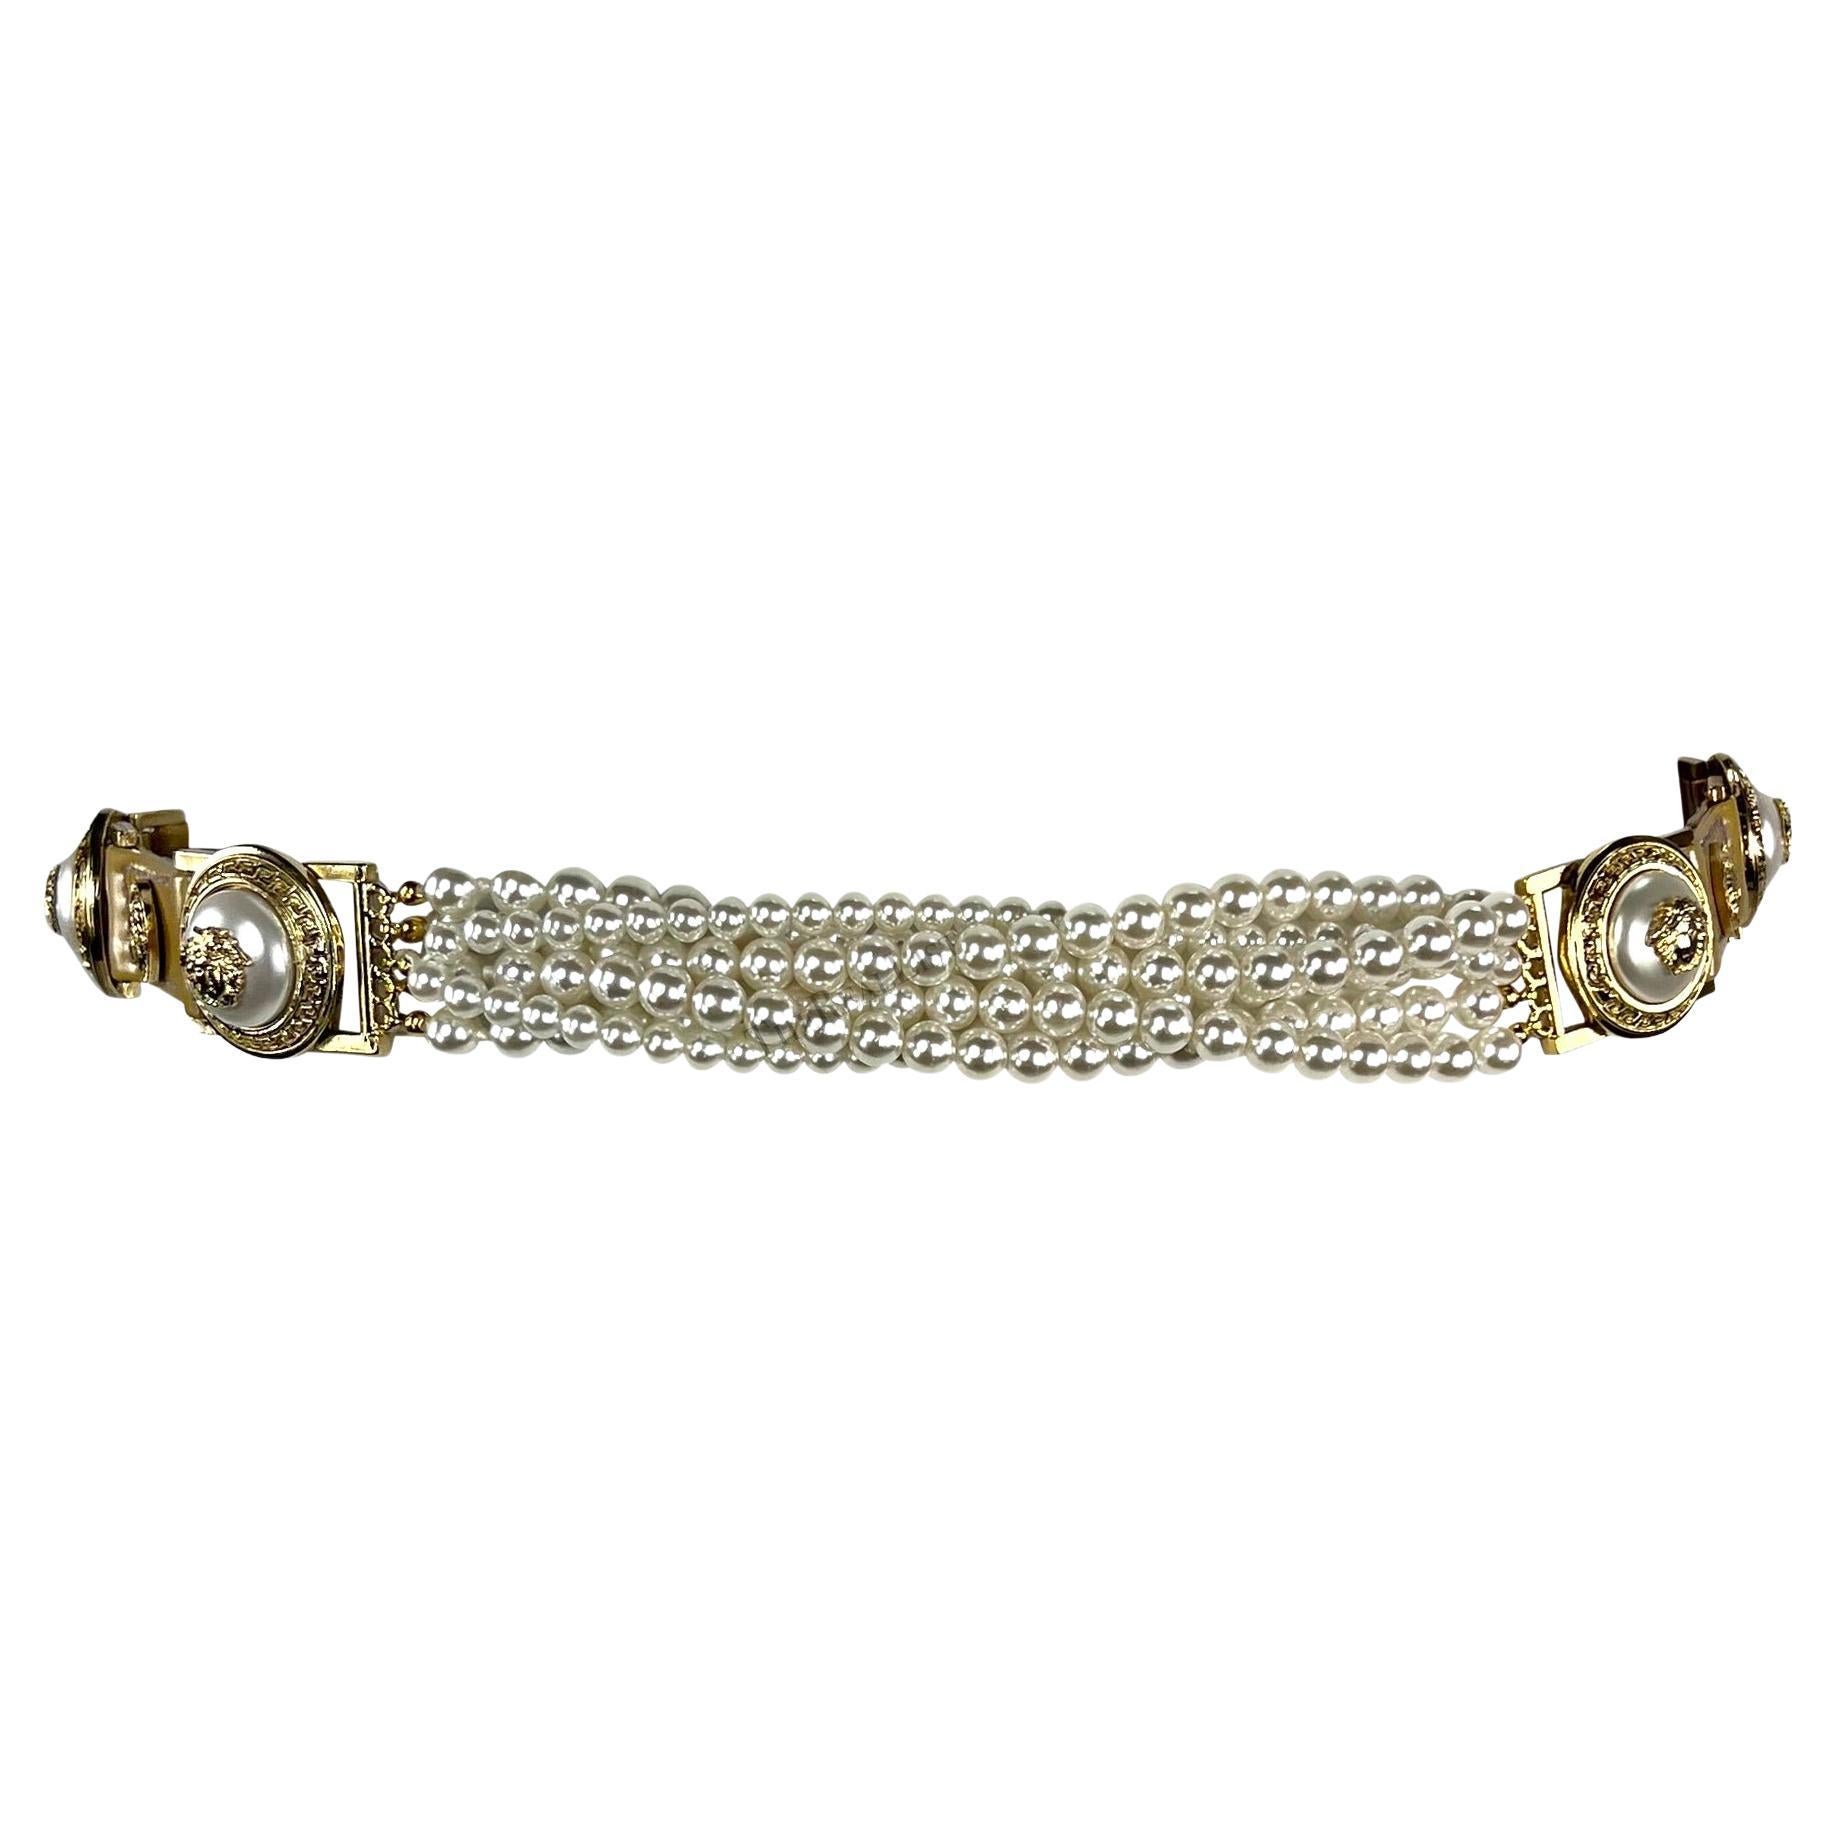 F/W 1994 Gianni Versace Medusa Faux Pearl Patent Leather Belt For Sale